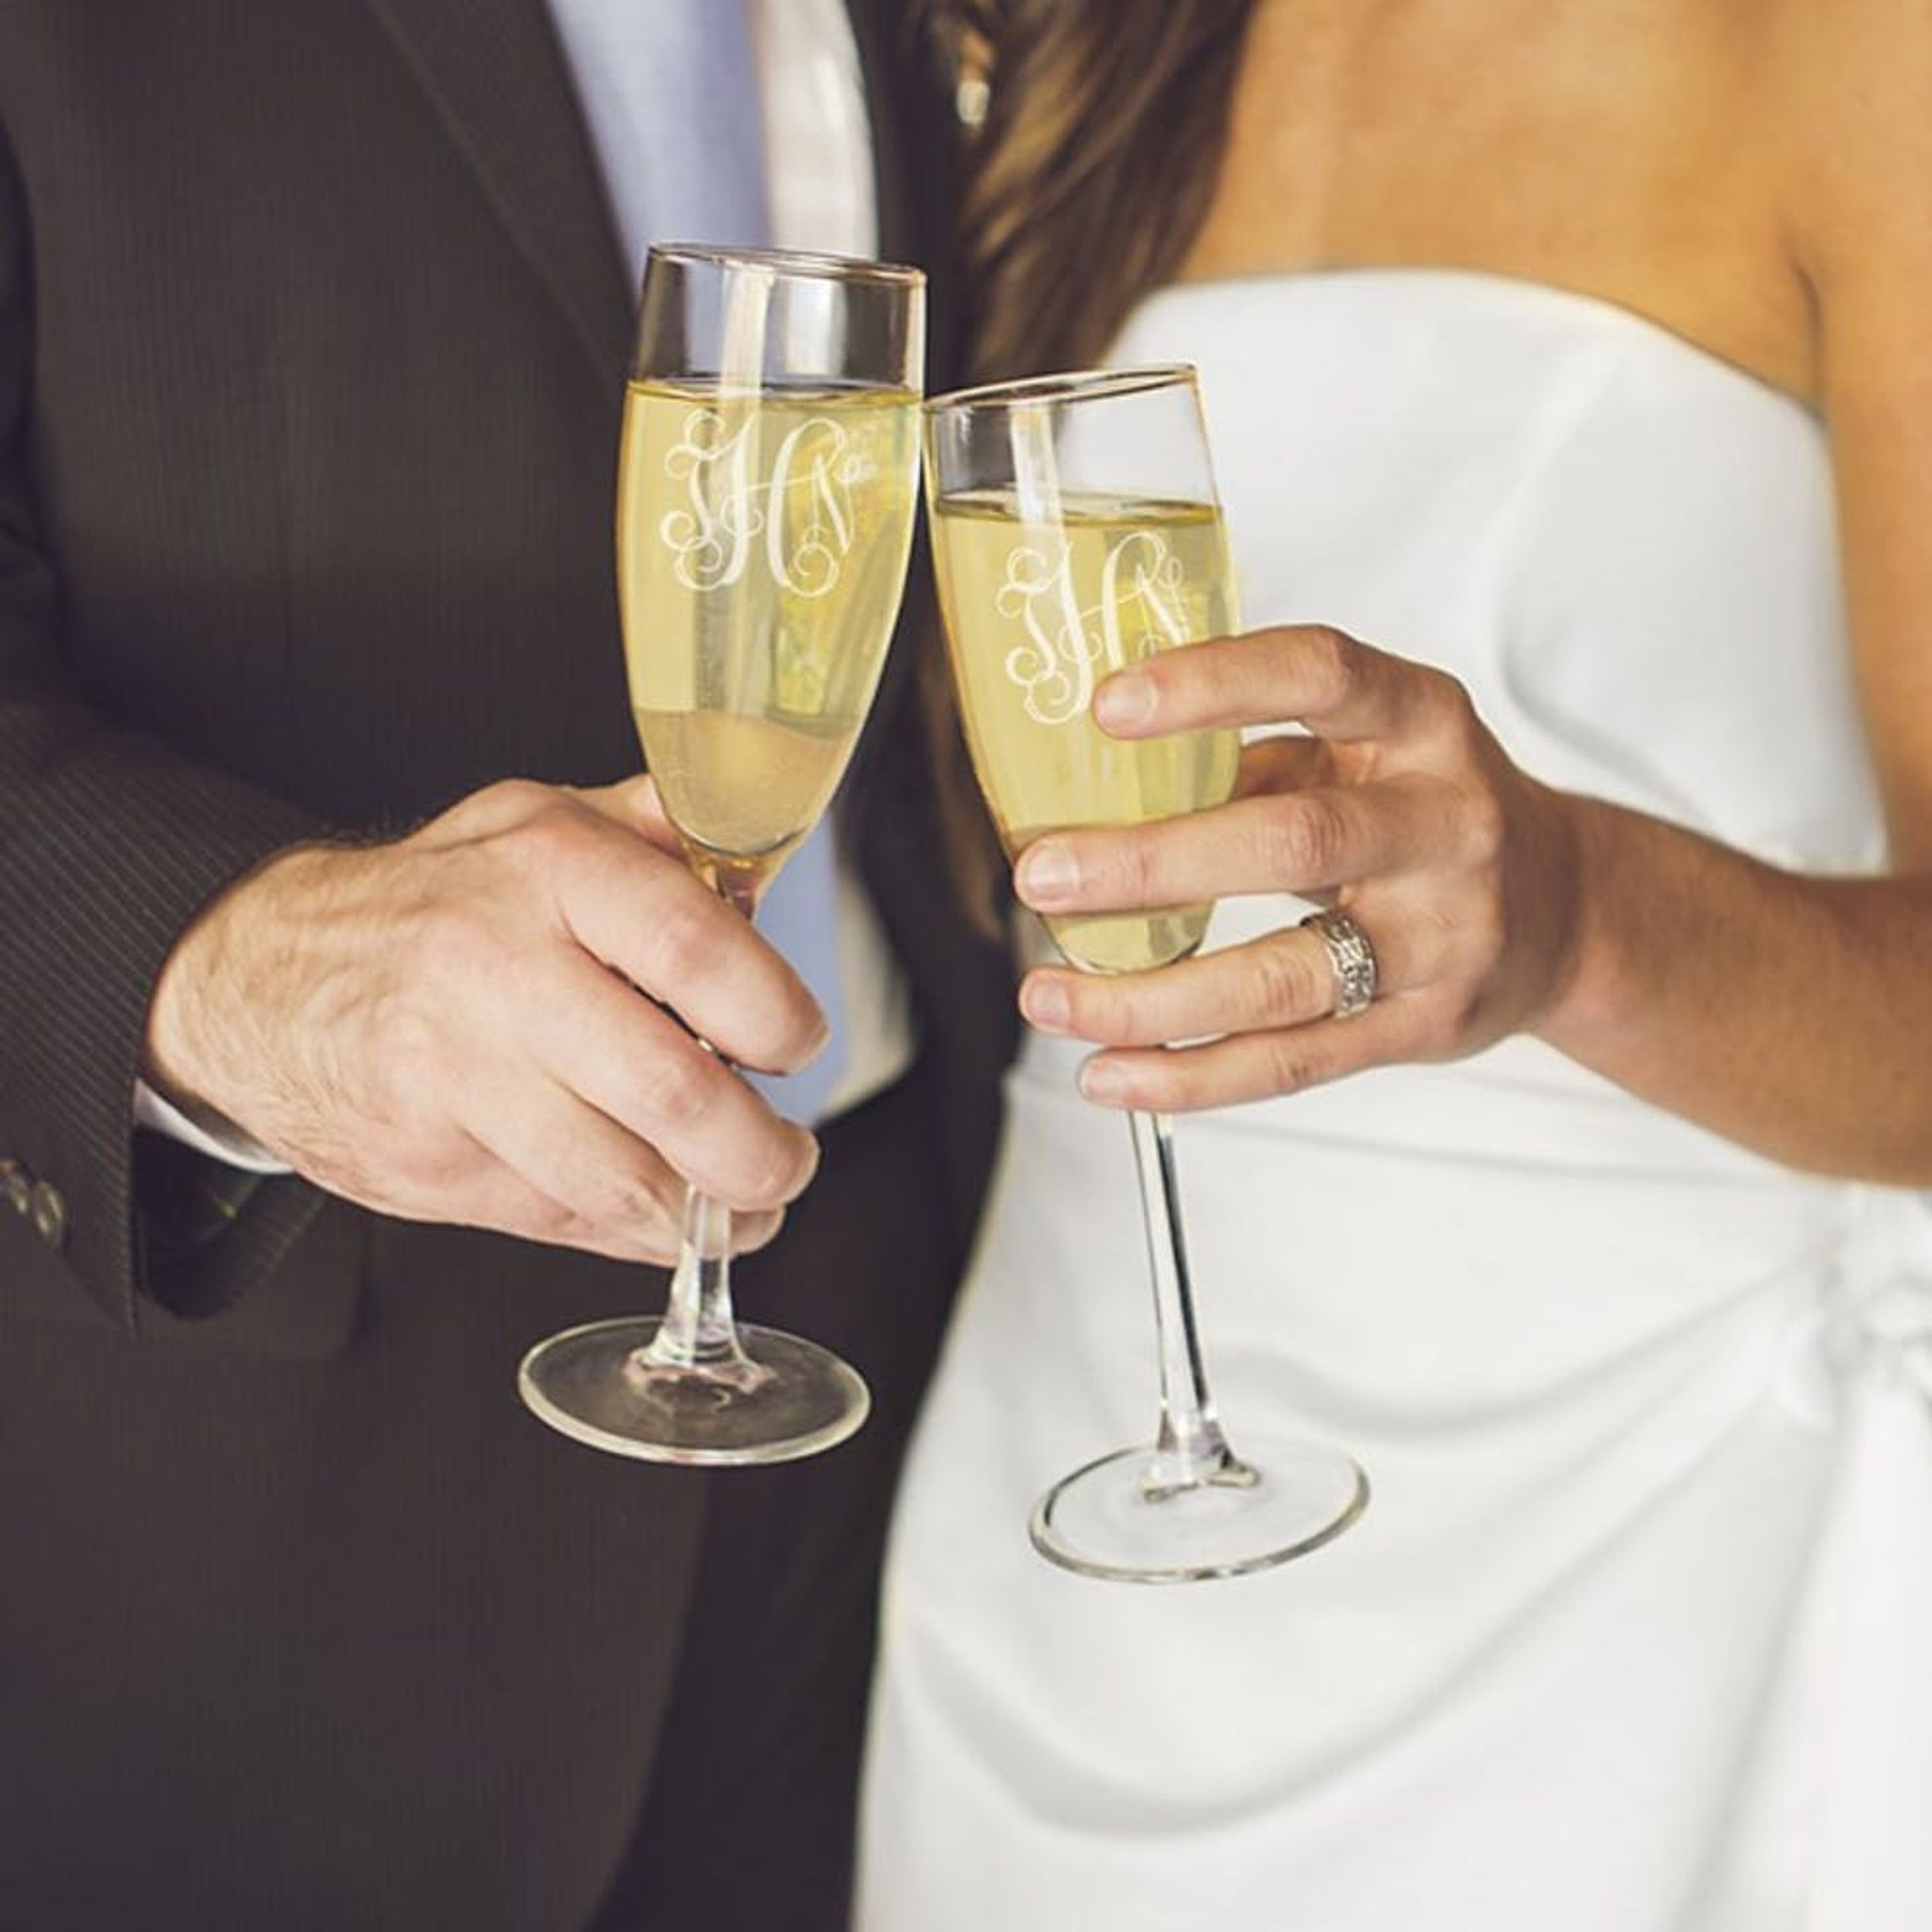 The Ideal Wedding Registry Finds by Myers-Briggs Personality Types